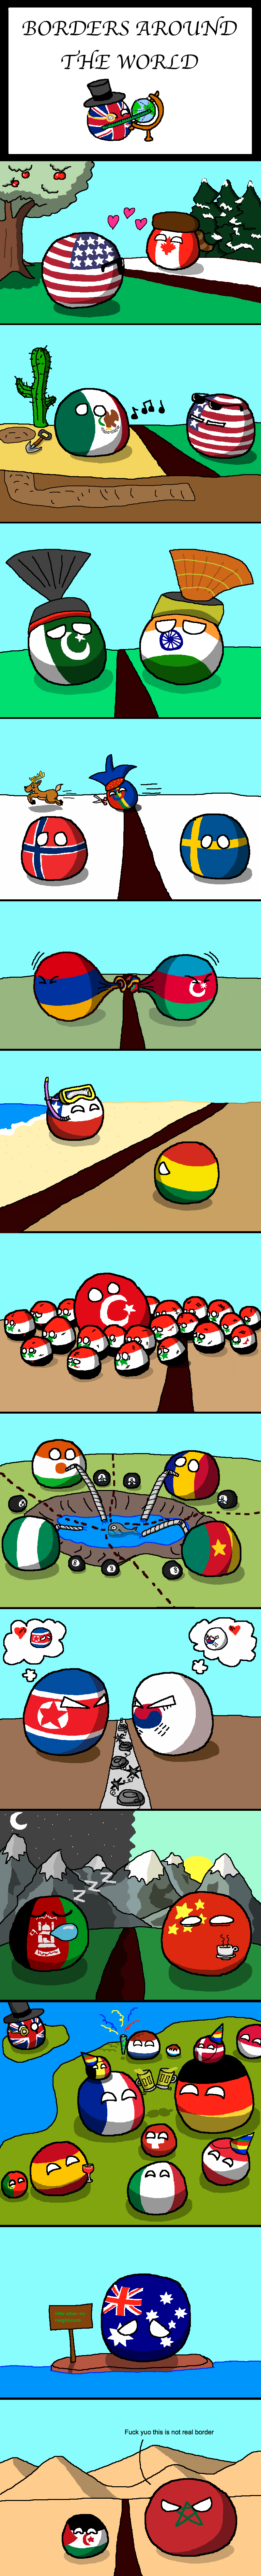 http://static.fjcdn.com/pictures/Borders+around+the+world+credit+to+countryball+and+chinaball+for_cbb45f_4669963.png